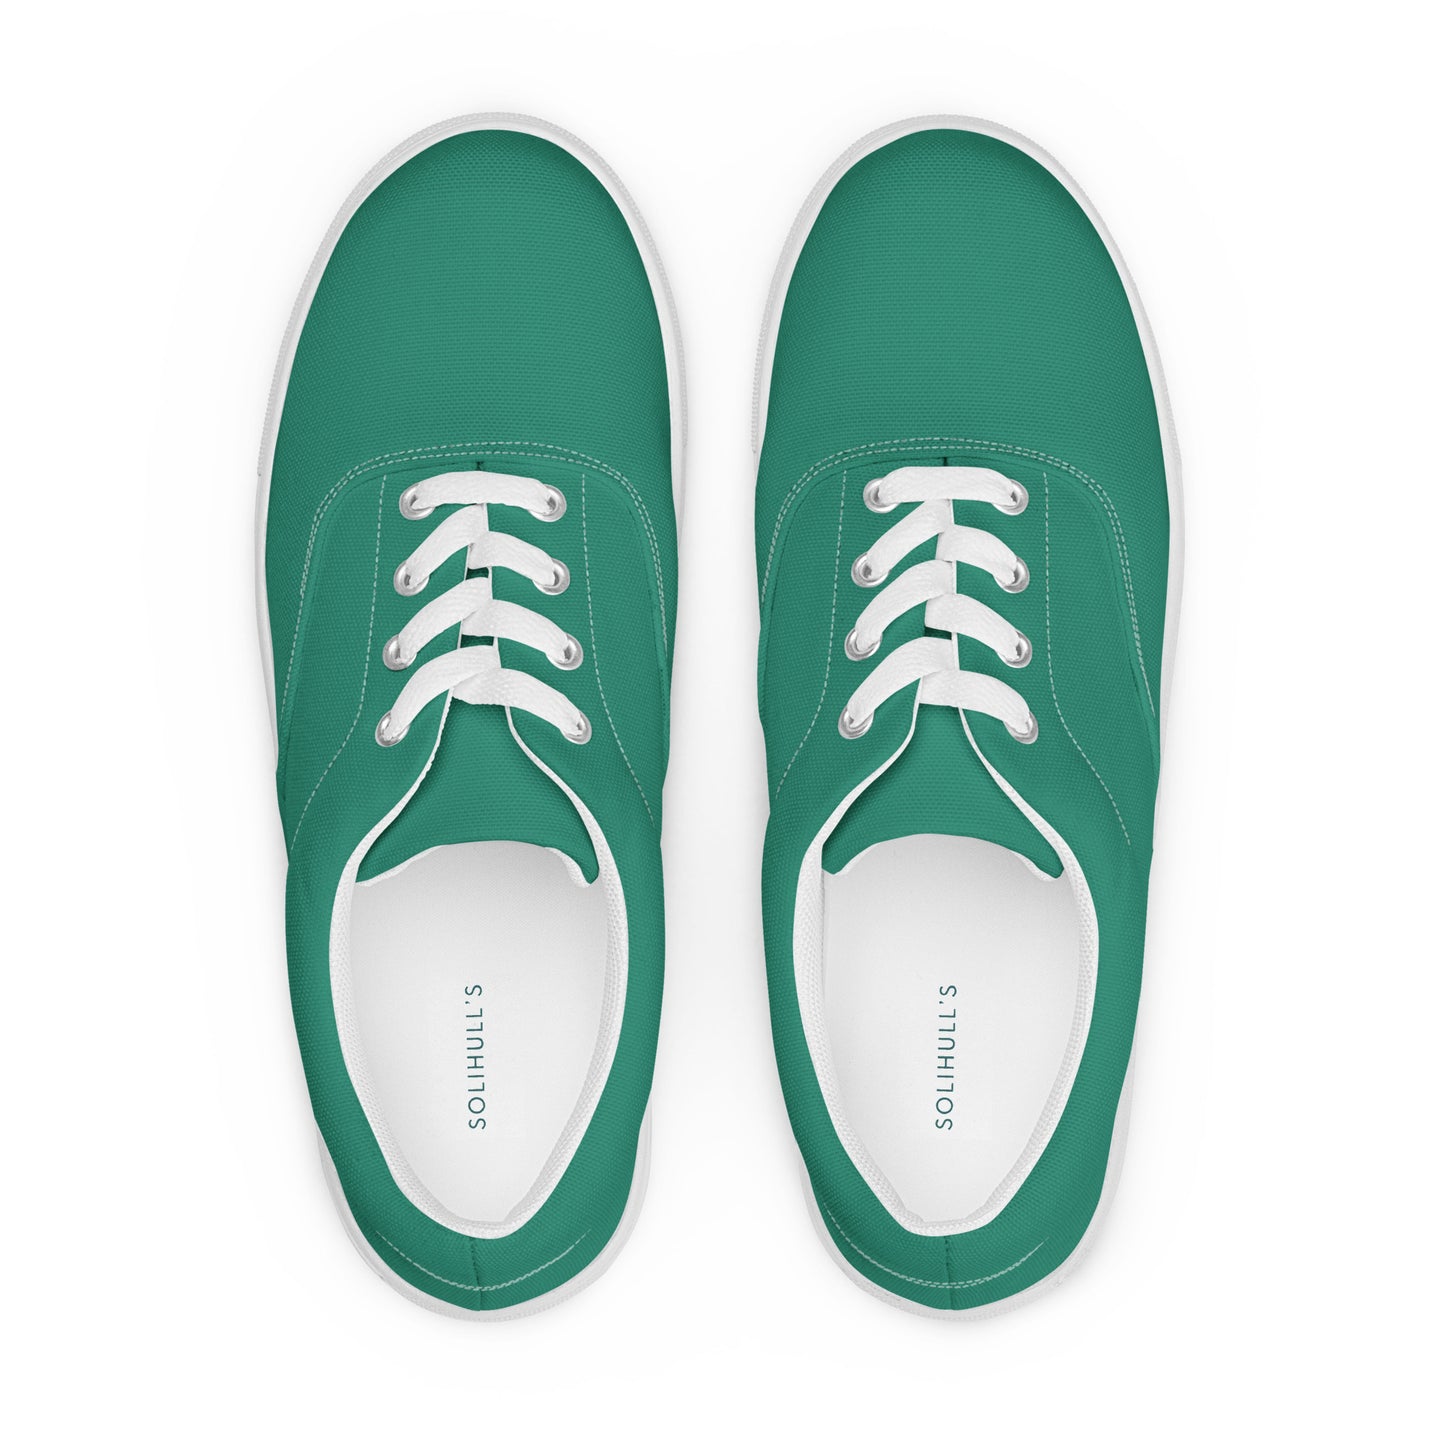 Women’s Elf Green Lace-Up